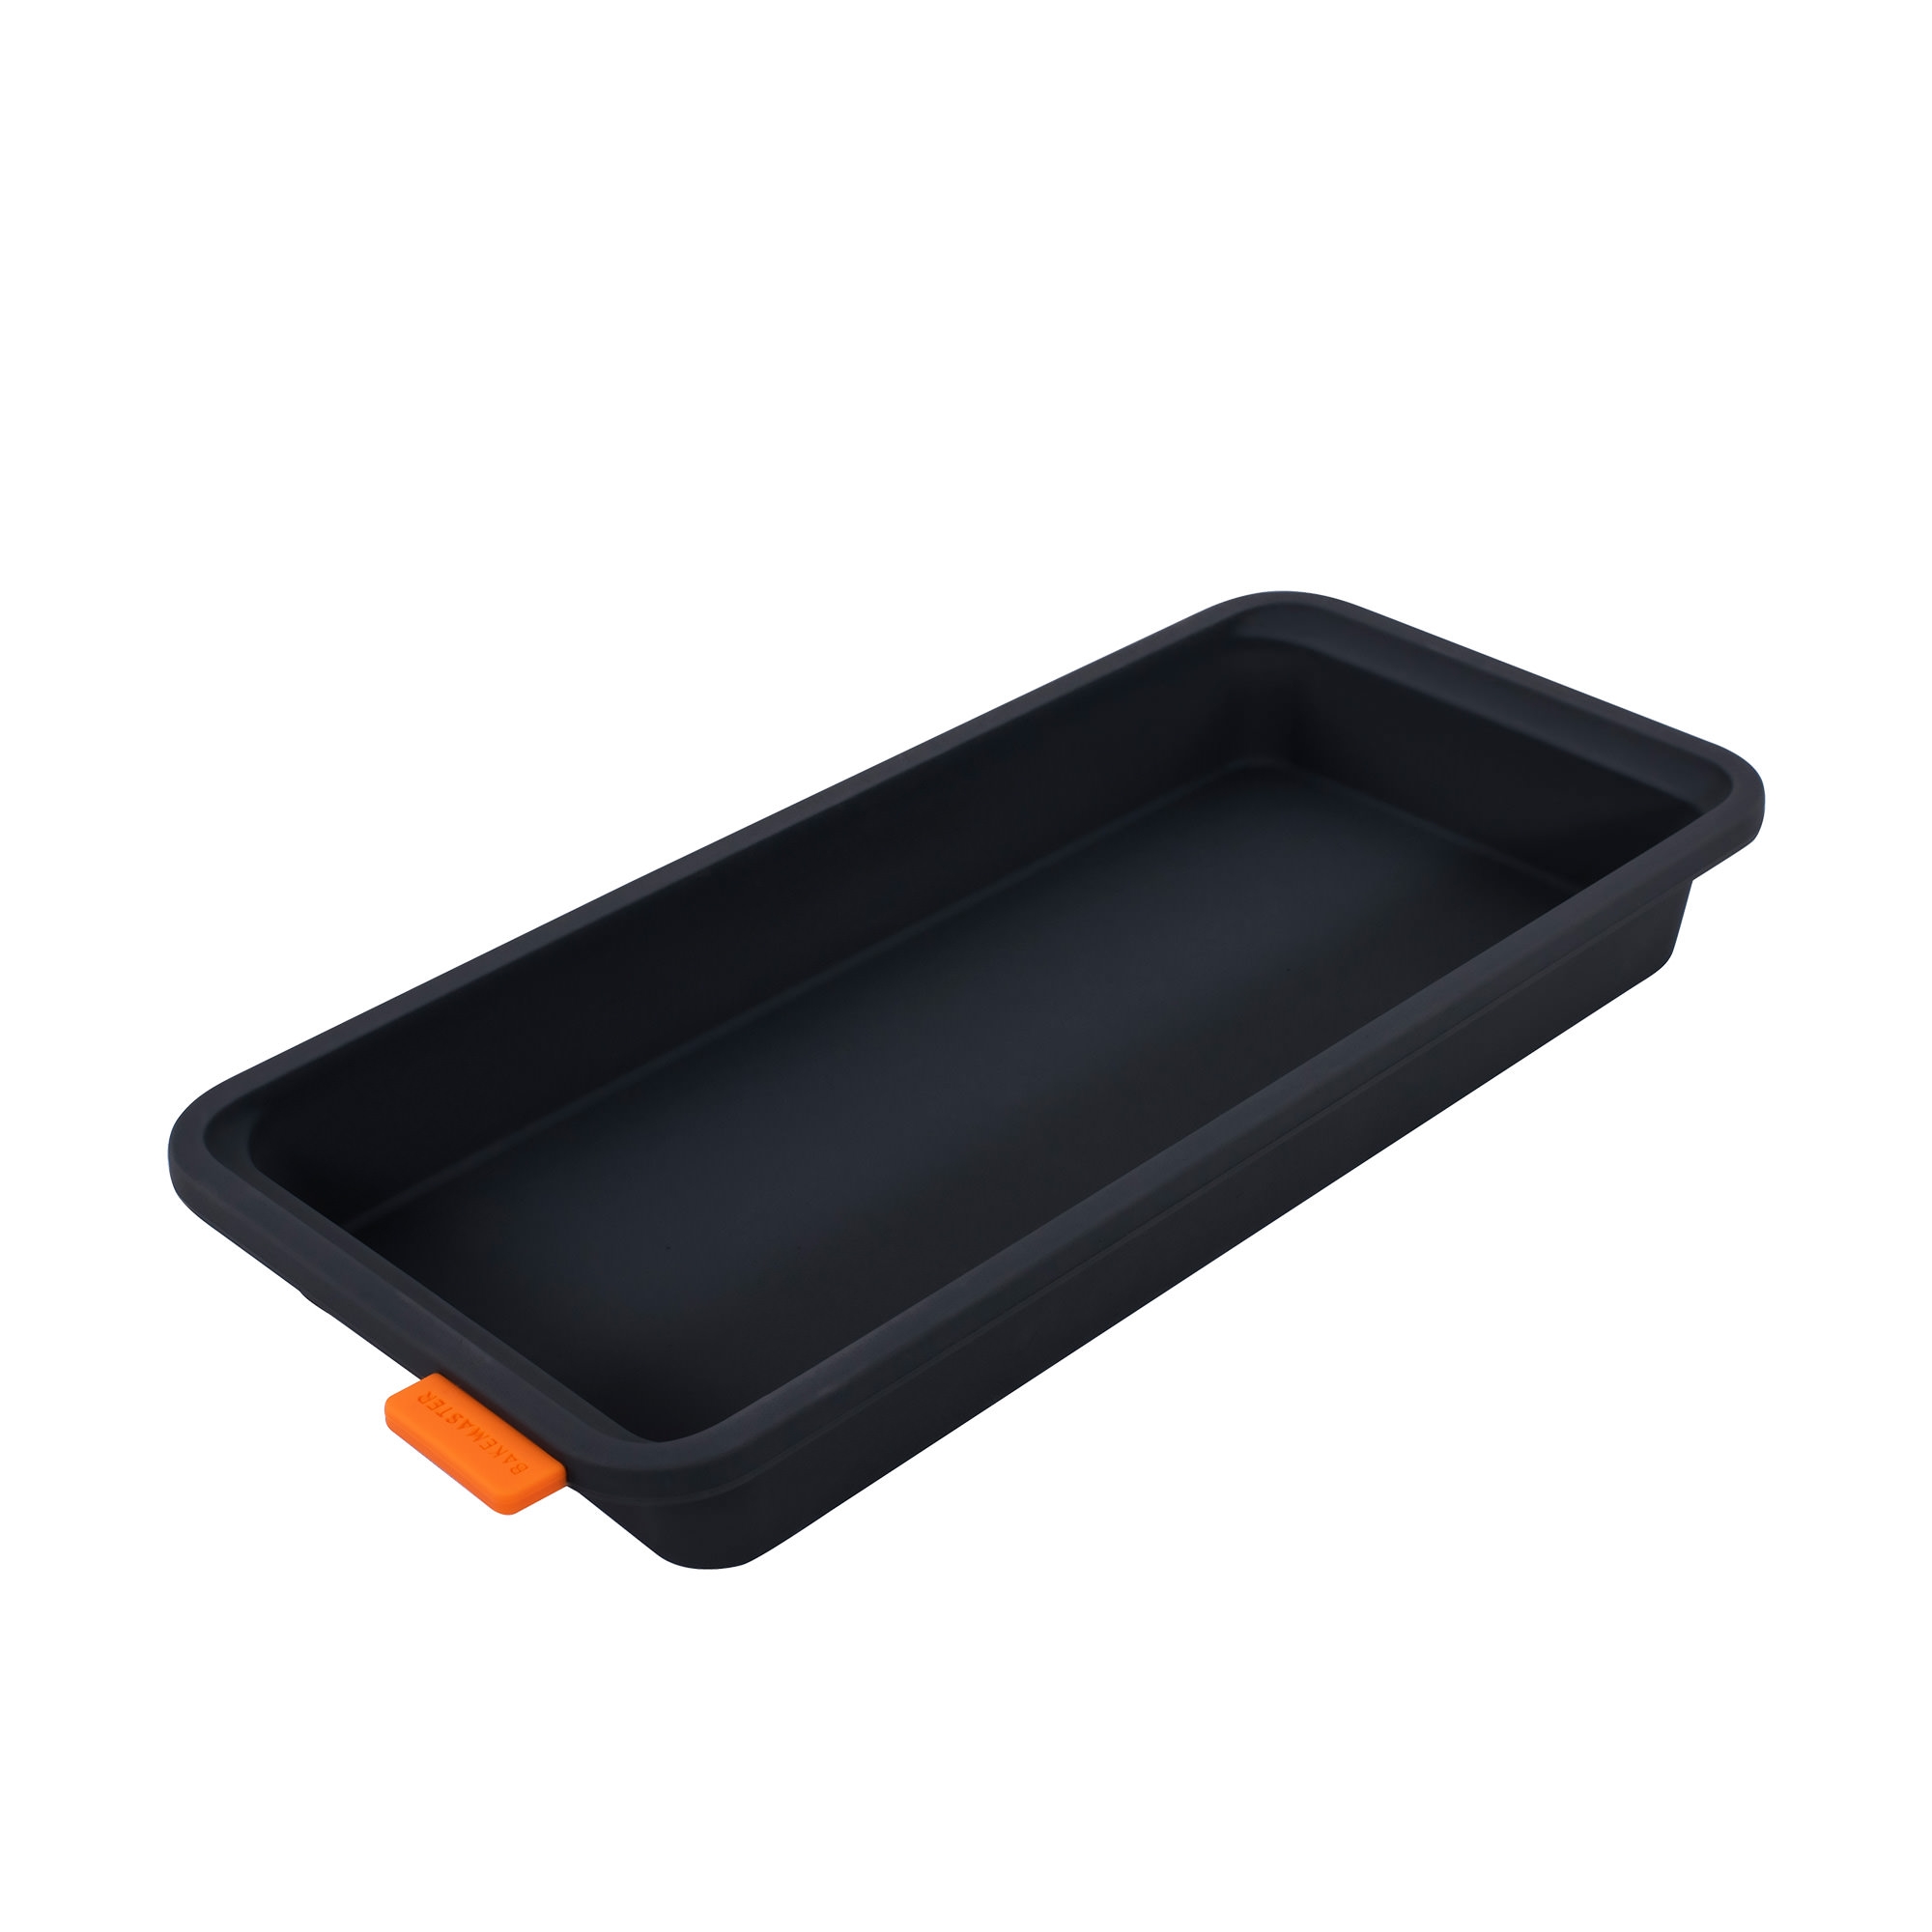 Bakemaster Reinforced Silicone Divider Tray 28x13cm Image 1